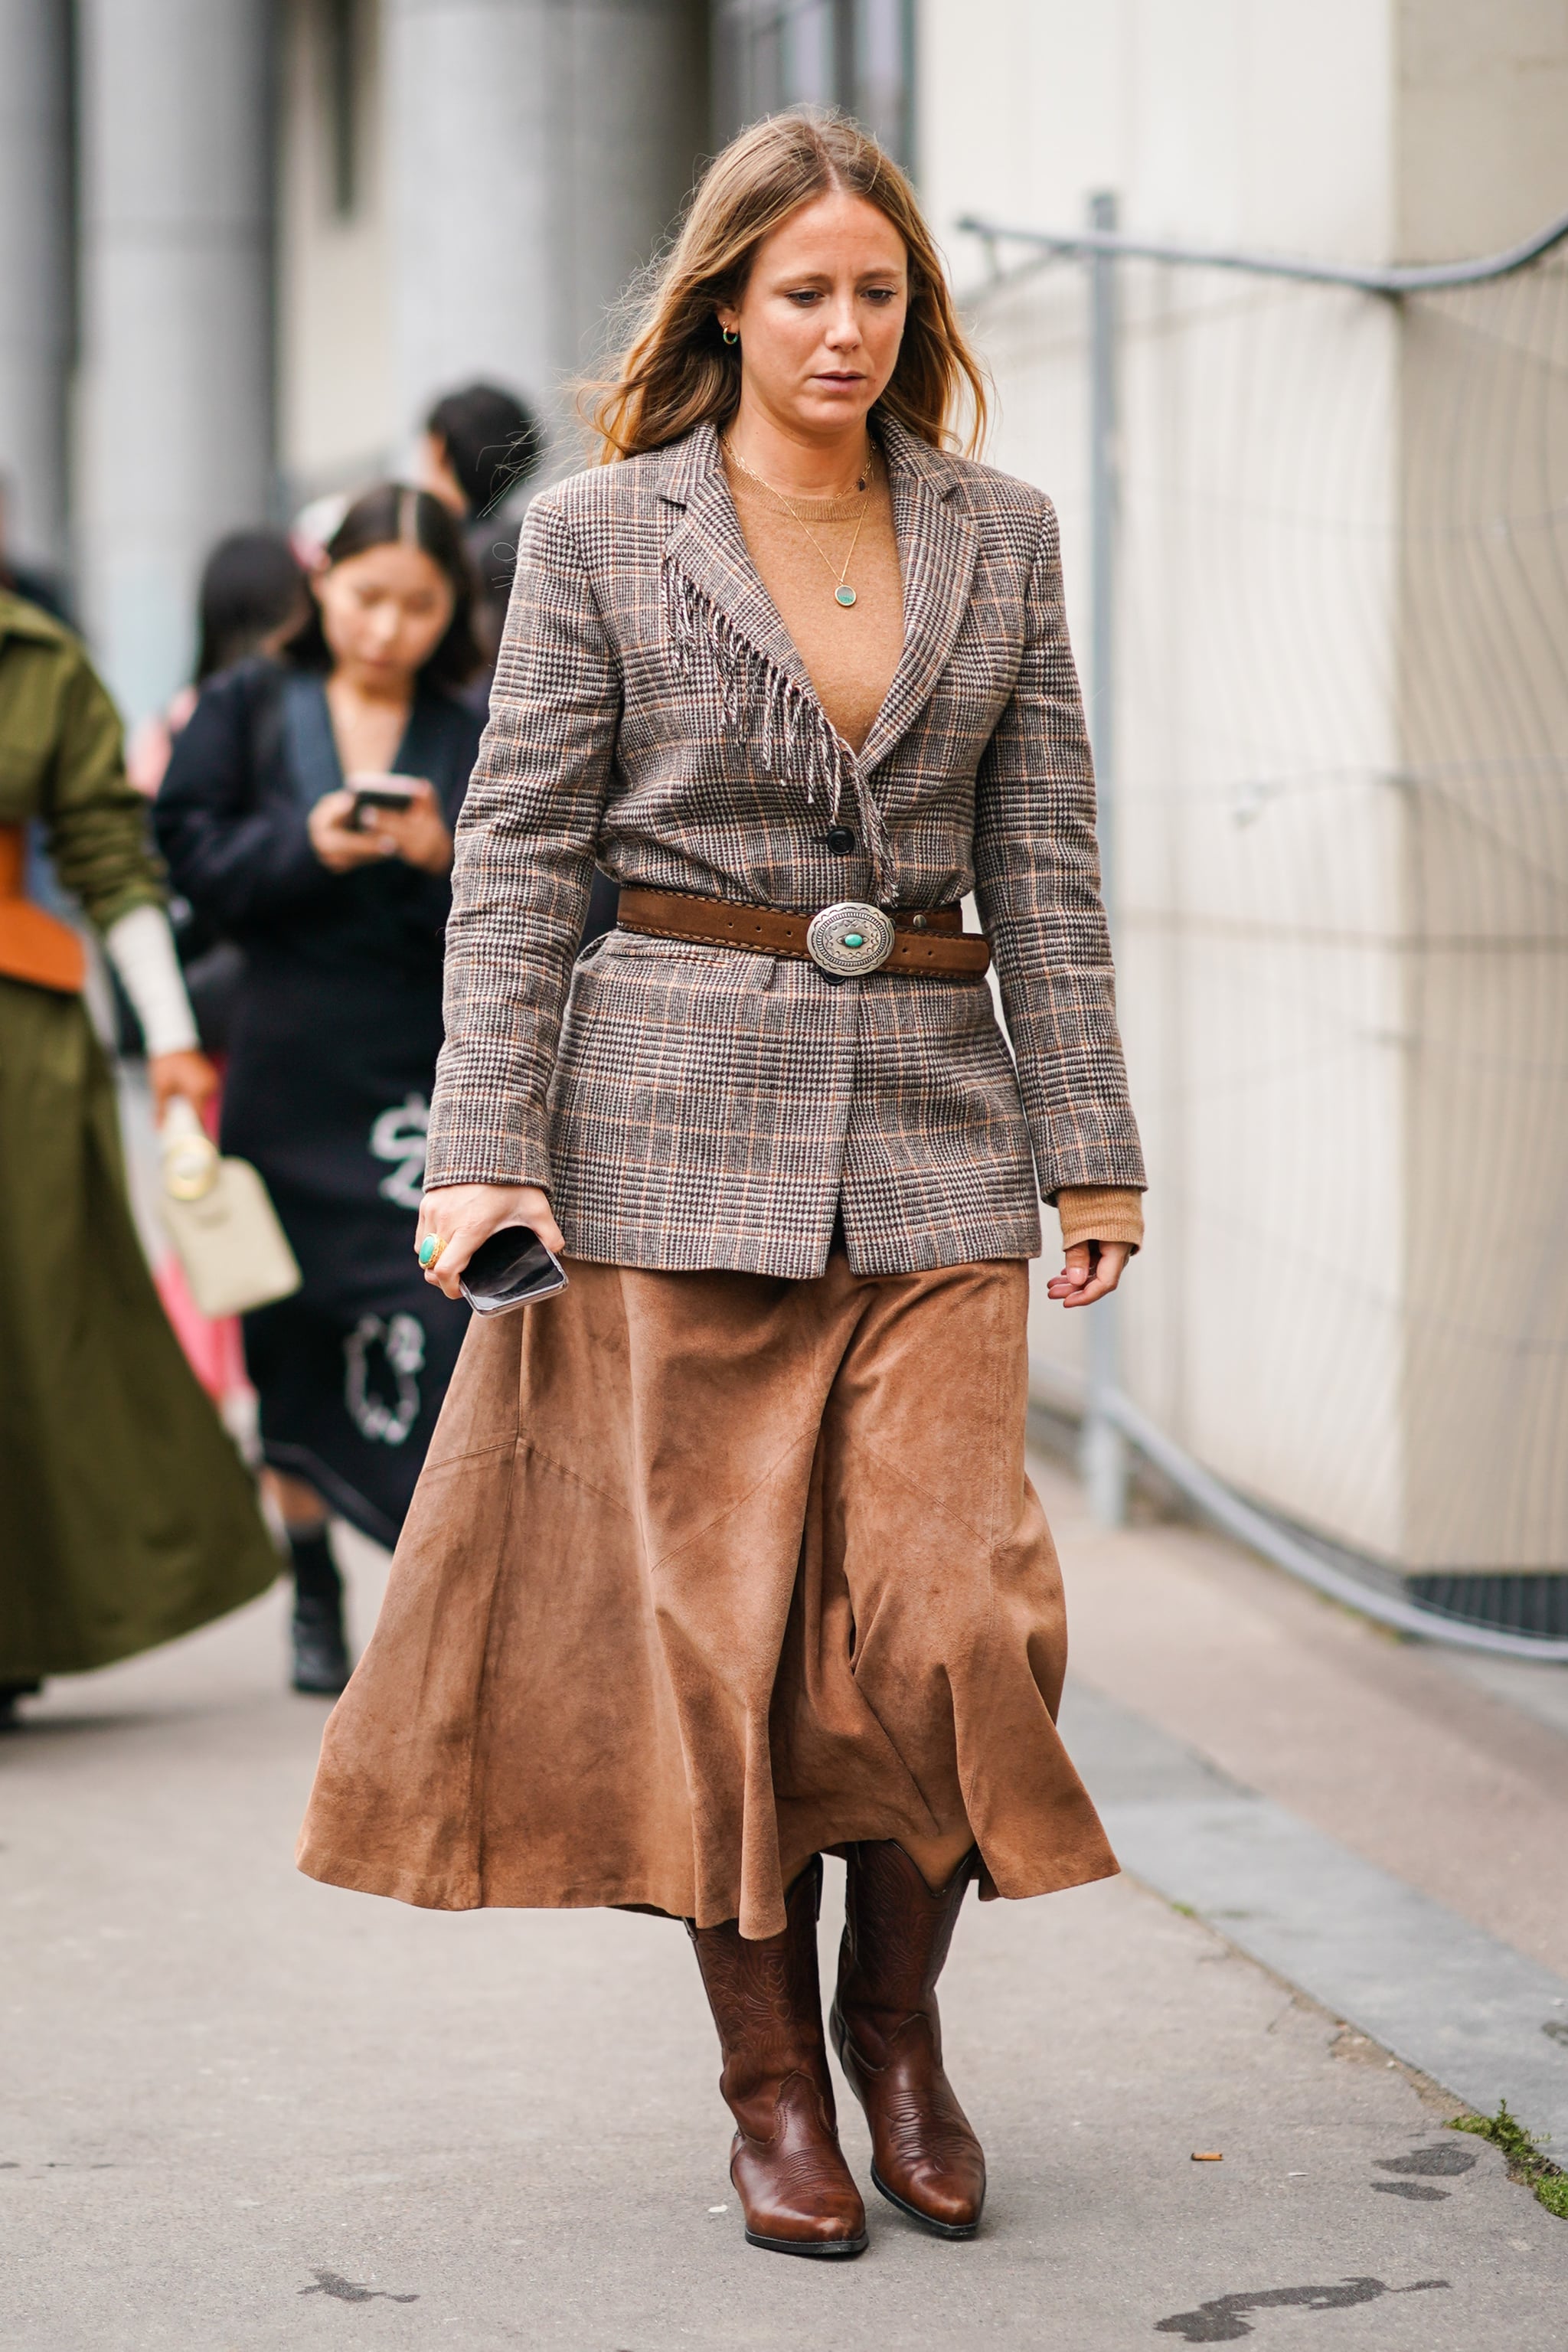 How to Wear Suede: An A-Line Skirt | 21 Superfresh Ways to Wear Suede Now Into Spring — Can You Dig It? | POPSUGAR Photo 60